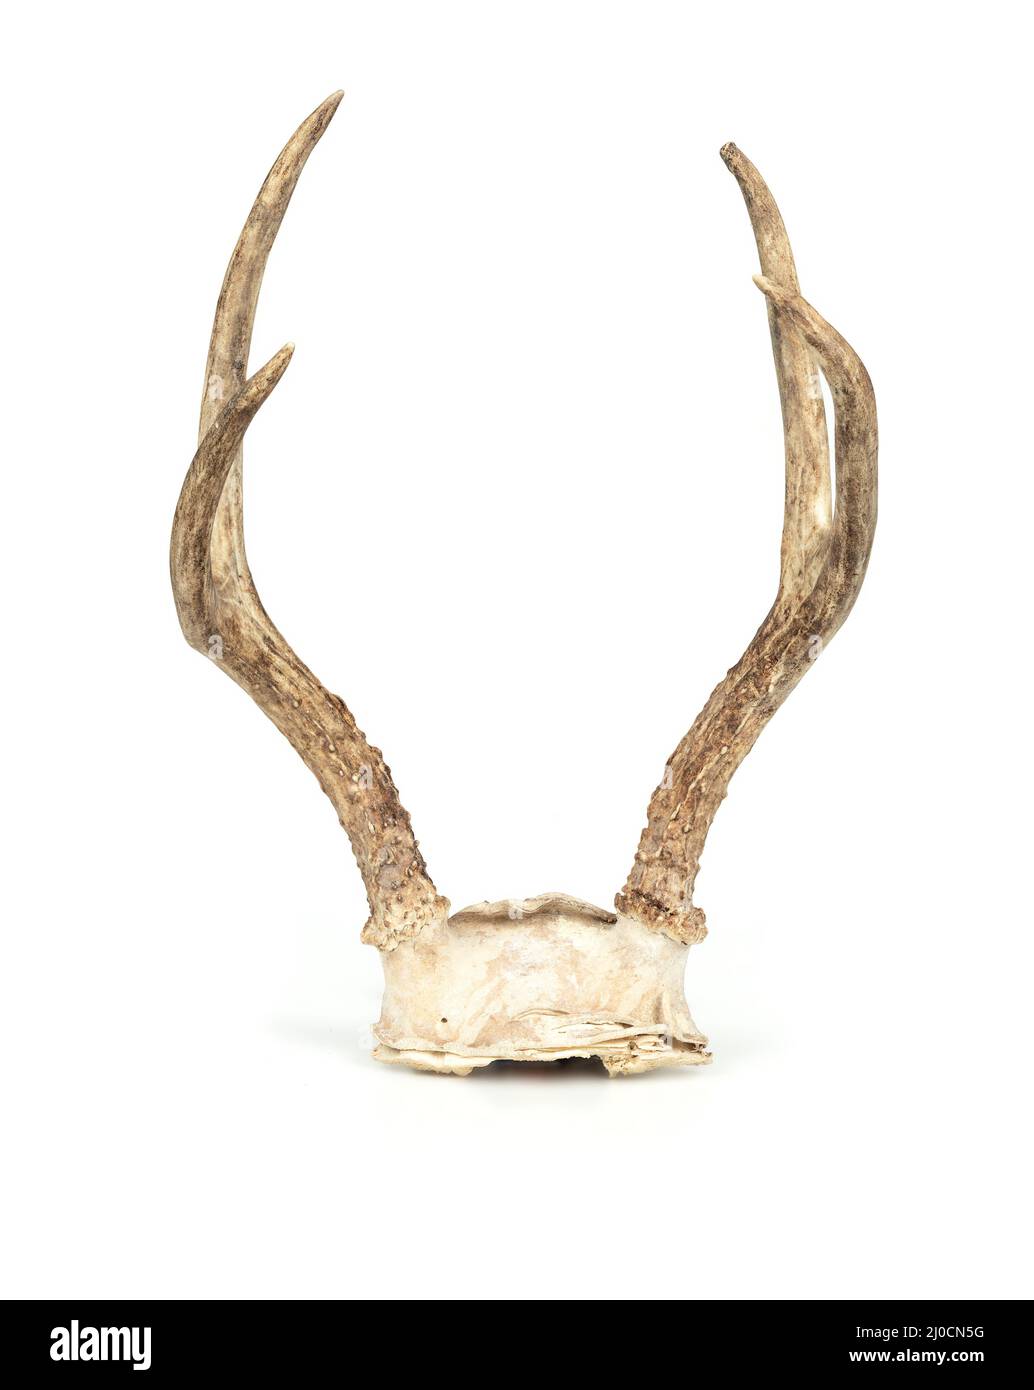 Isolated deer antlers or deer rack. 2 point horns of deer. Standing animal horns attached to partial skull plate. Rustic cabin-style table or wall dec Stock Photo